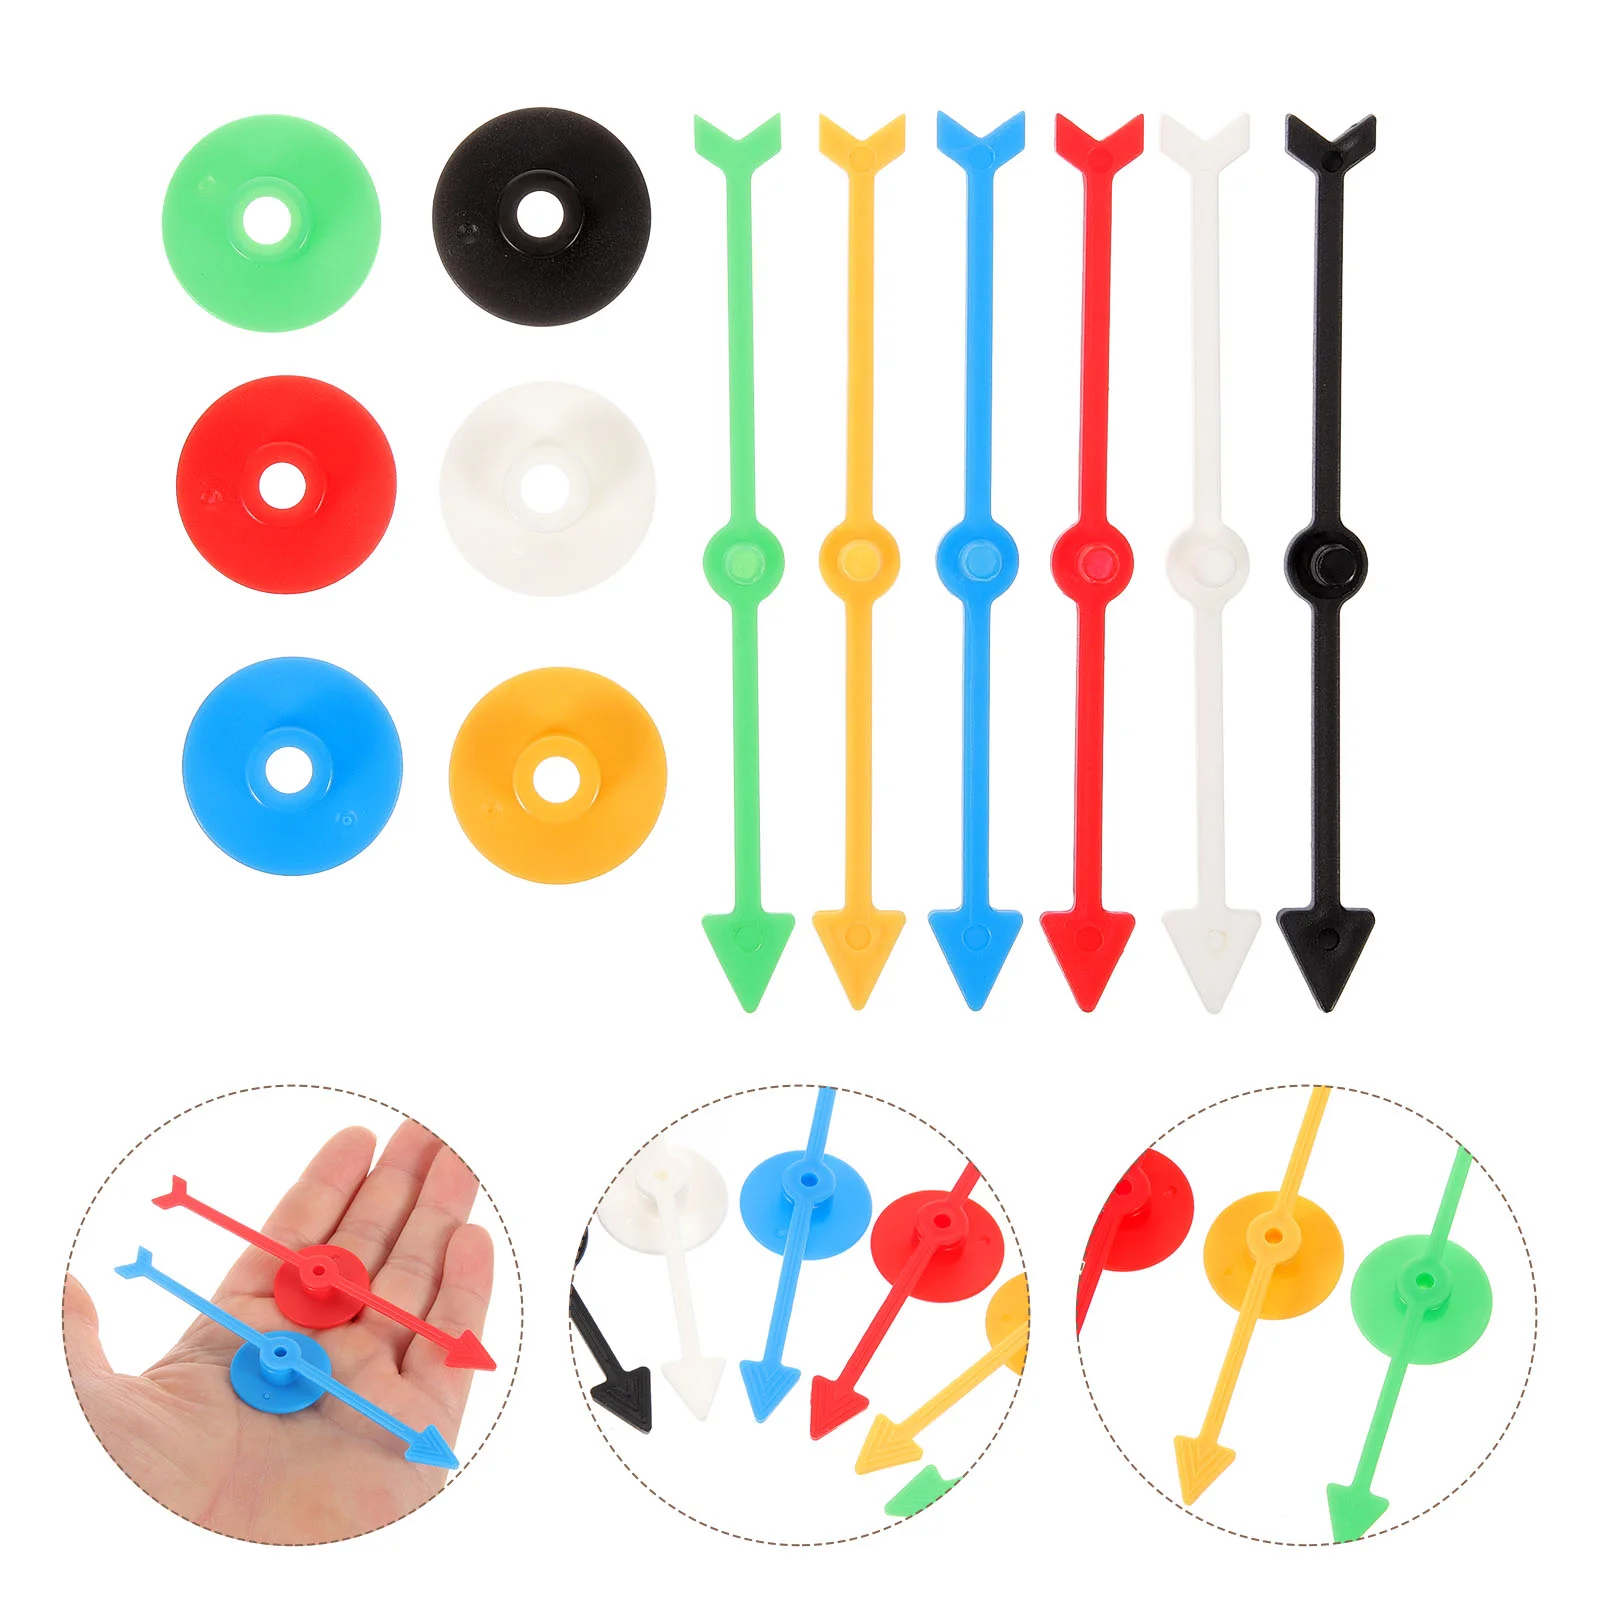 

6pcs DIY Game Arrows Replacement Plastic Arrow Spinners Accessory Plastic Board Game Pointers